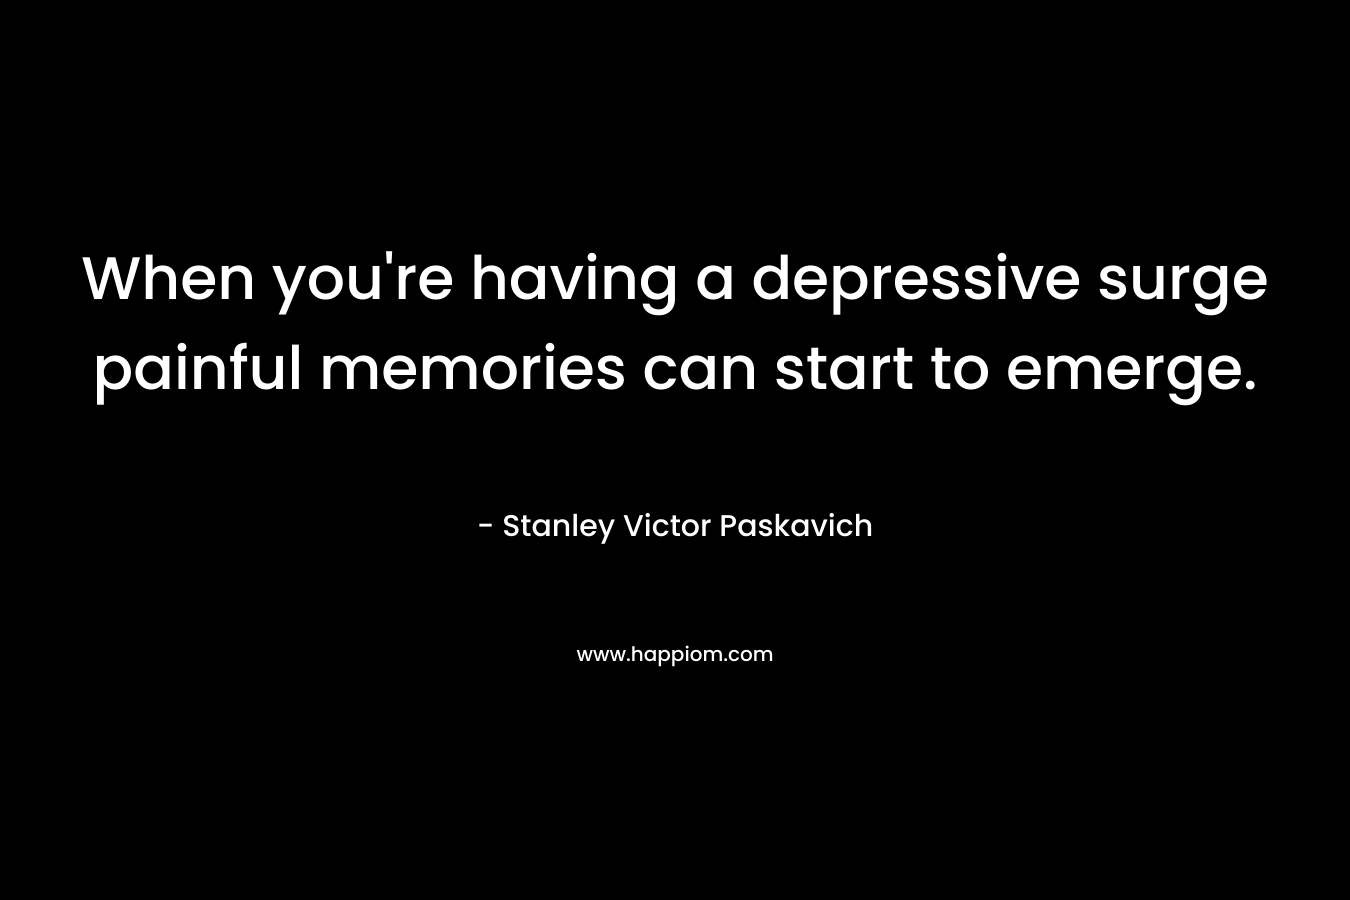 When you're having a depressive surge painful memories can start to emerge.